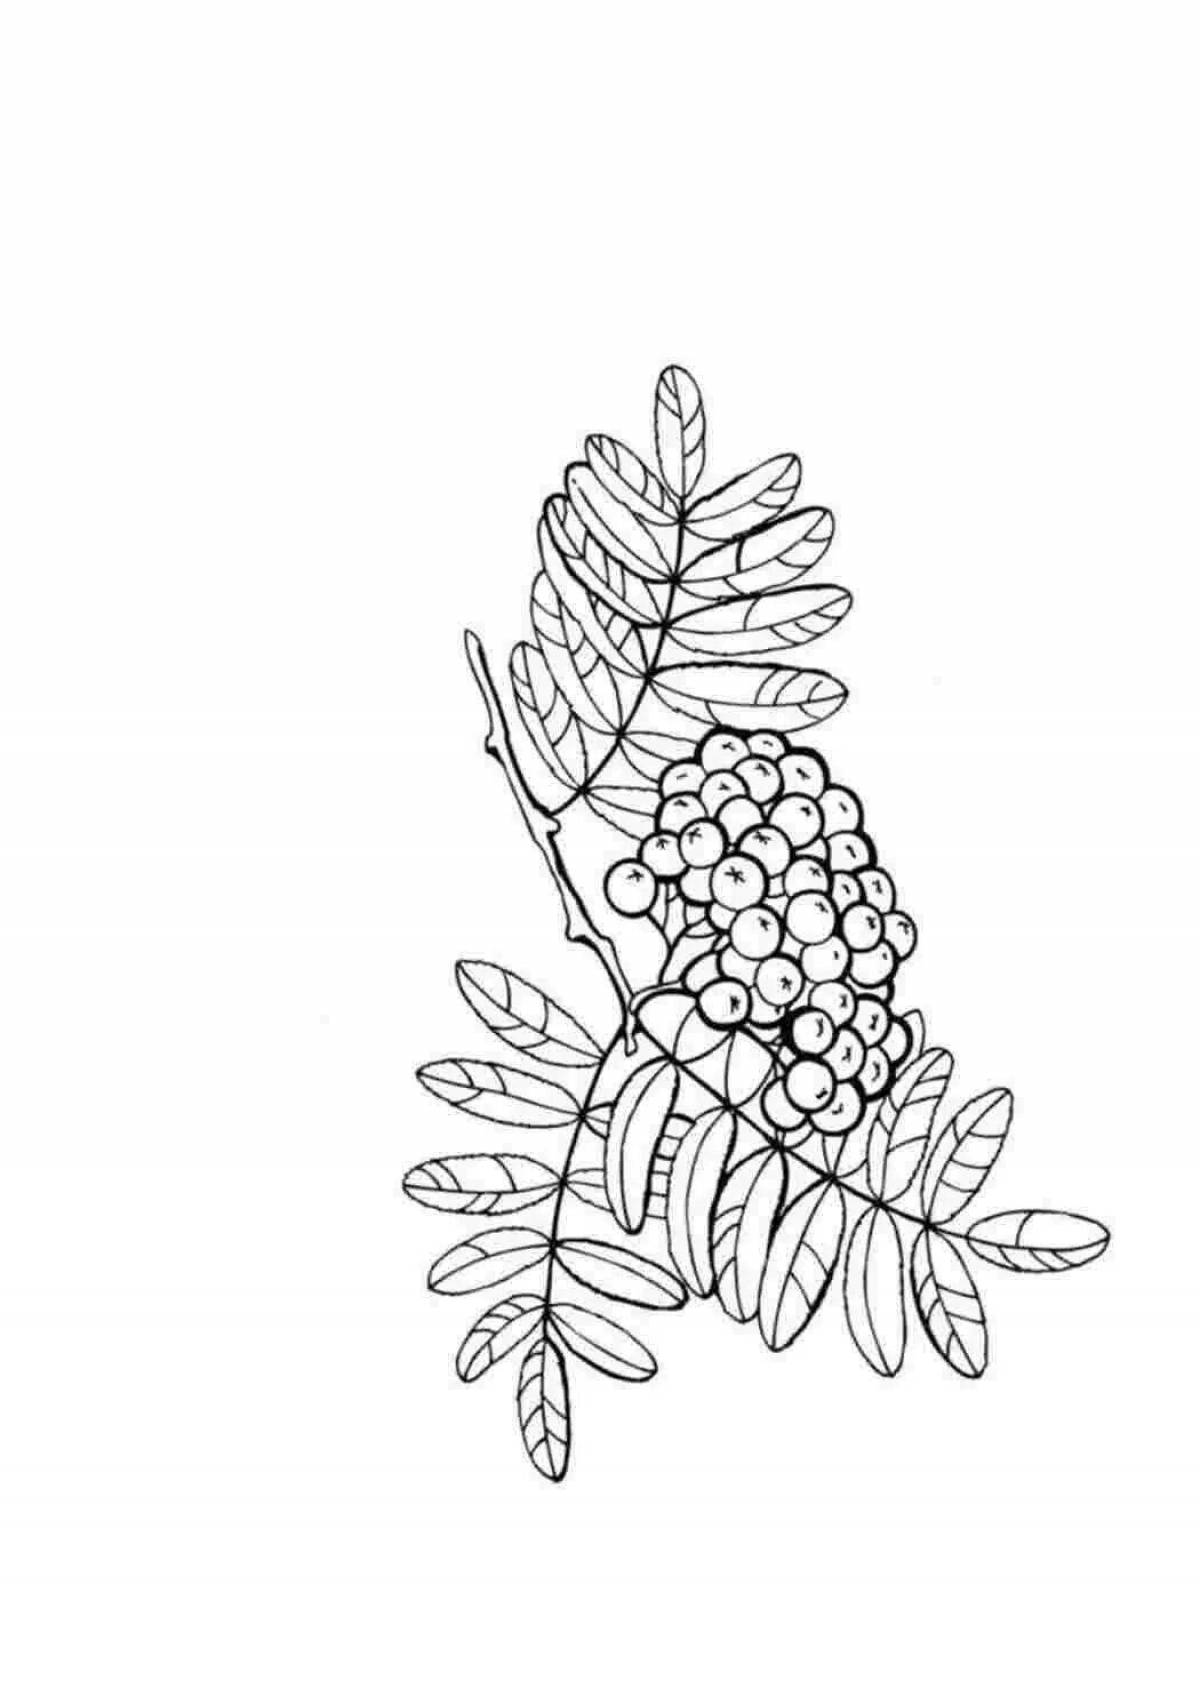 Fun coloring rowan twig for the little ones